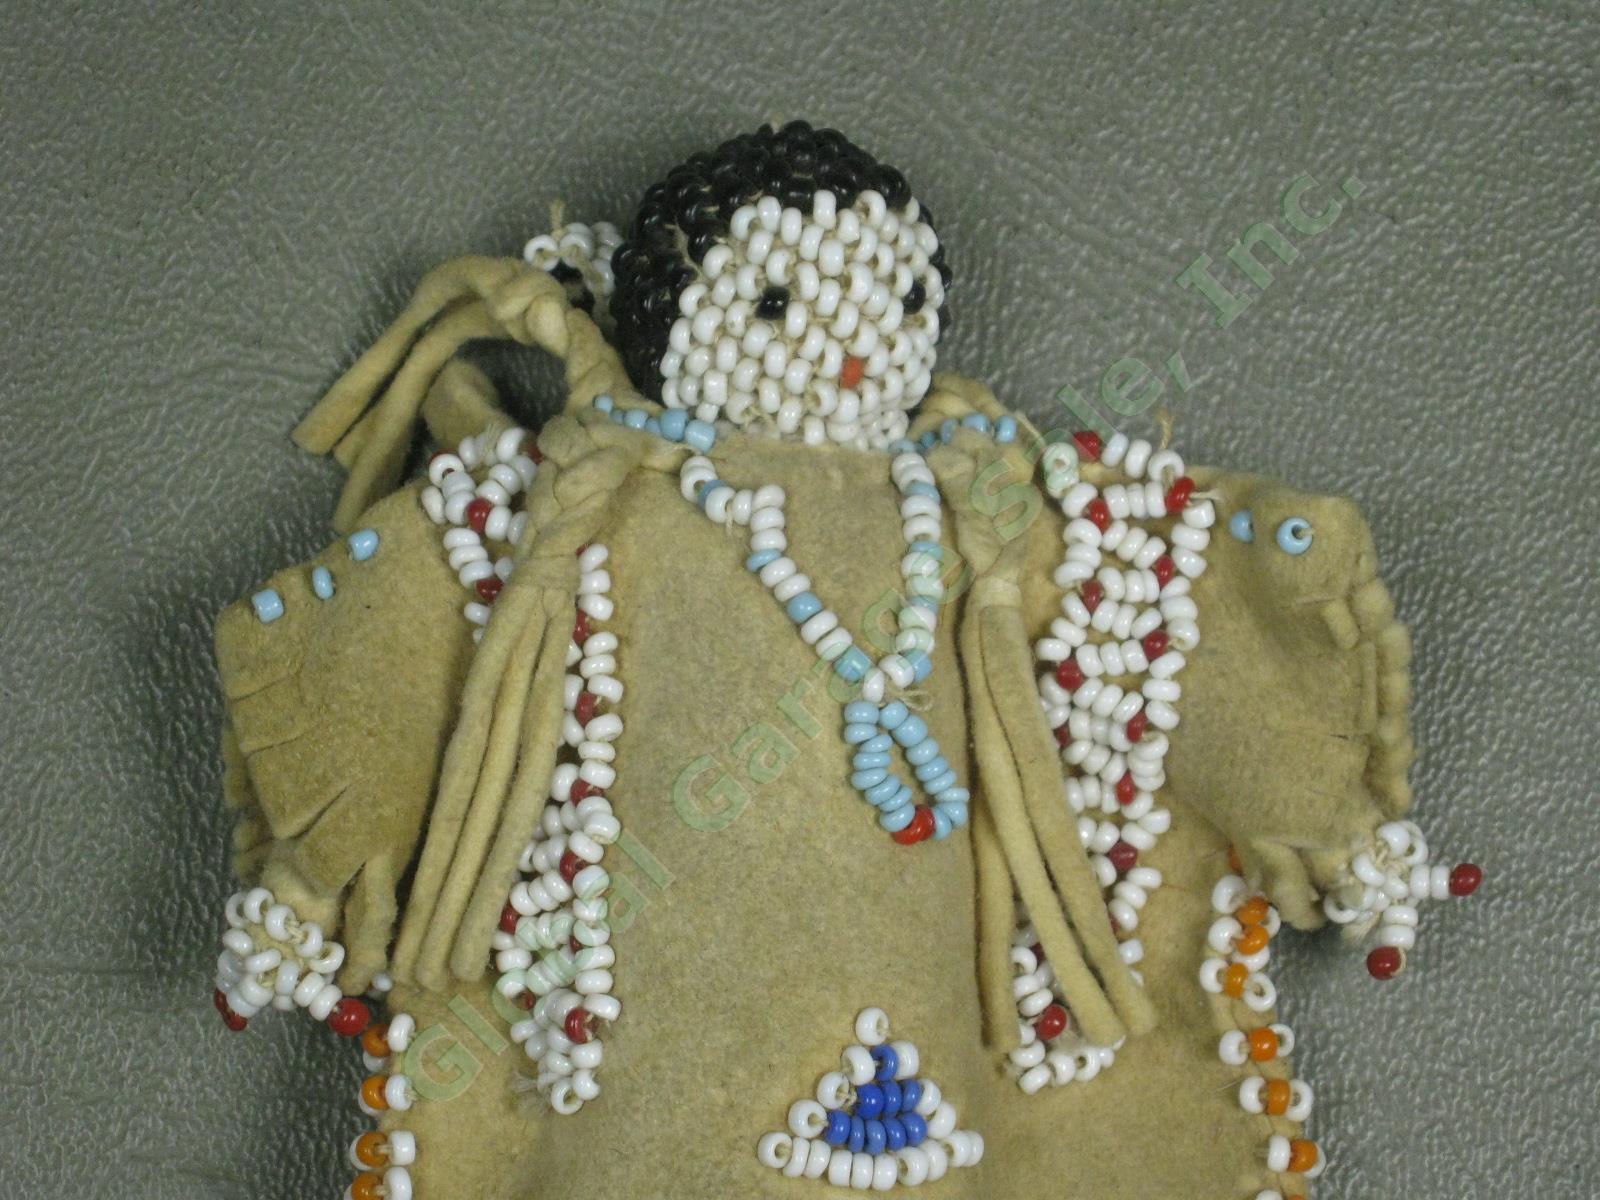 6 Vtg Antique 1940s Navajo Native American Indian Cloth Doll Lot Weaving Beaded 6